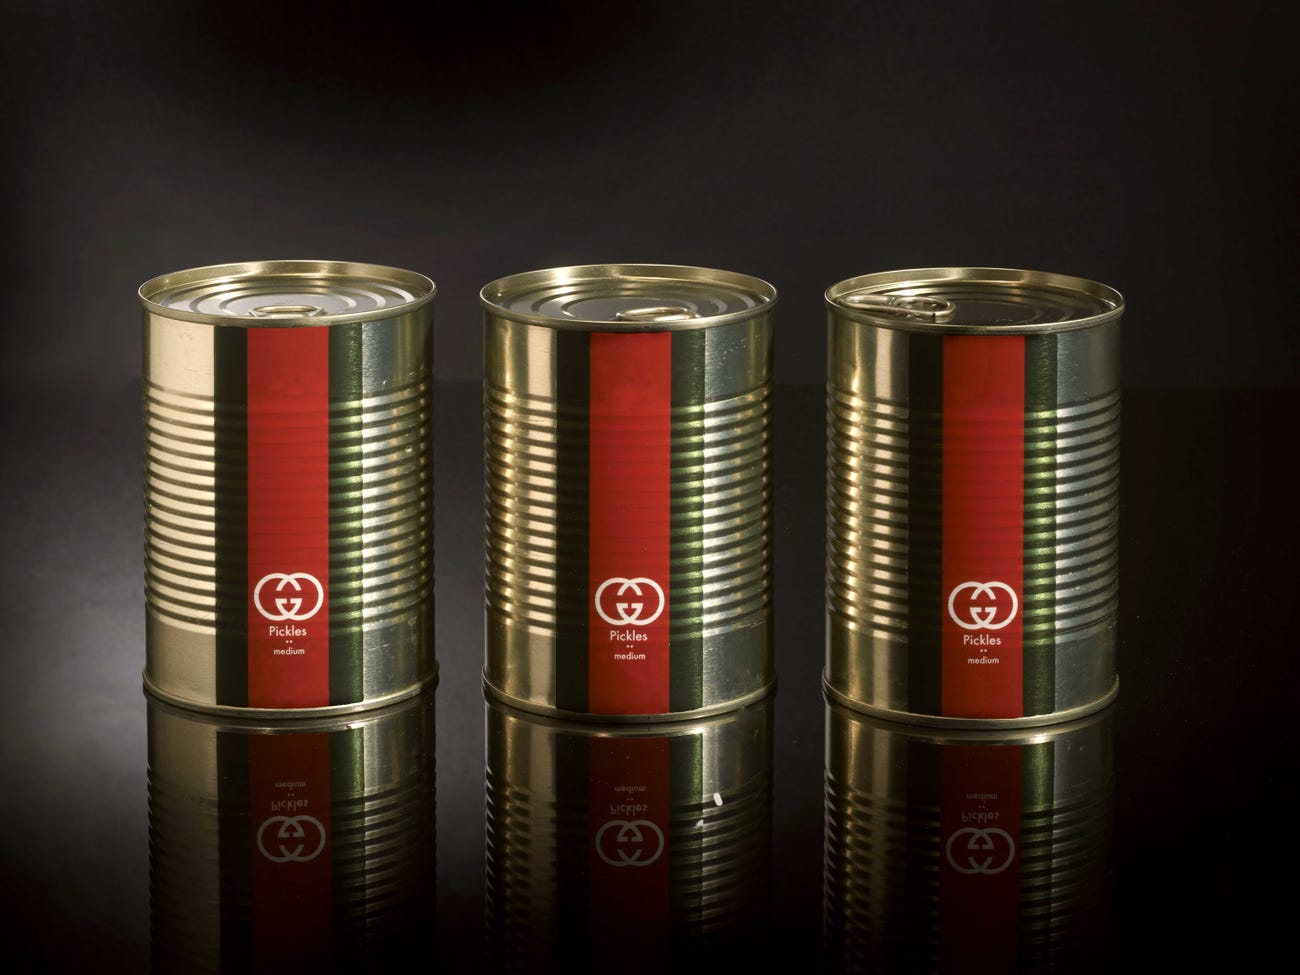 Cans of Gucci-brand pickles.